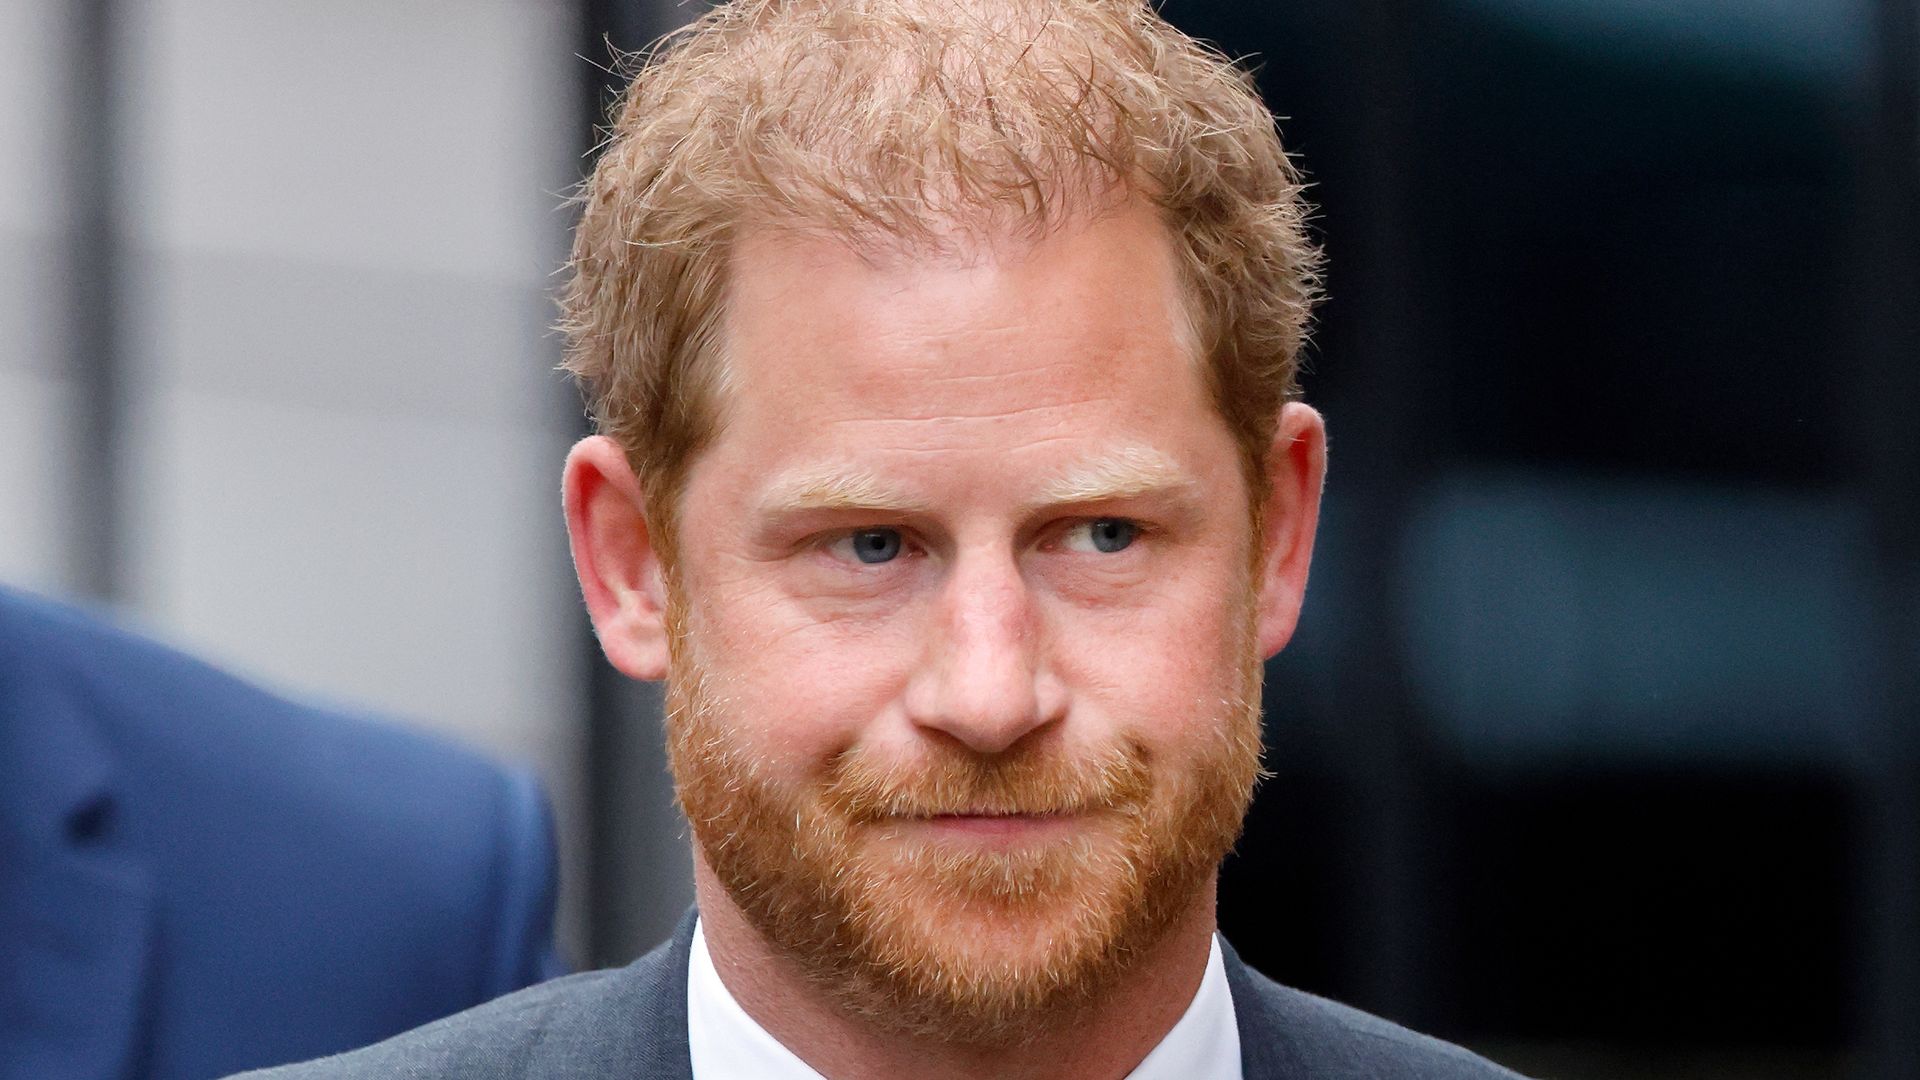 Prince Harry looking serious in a suit at court in London